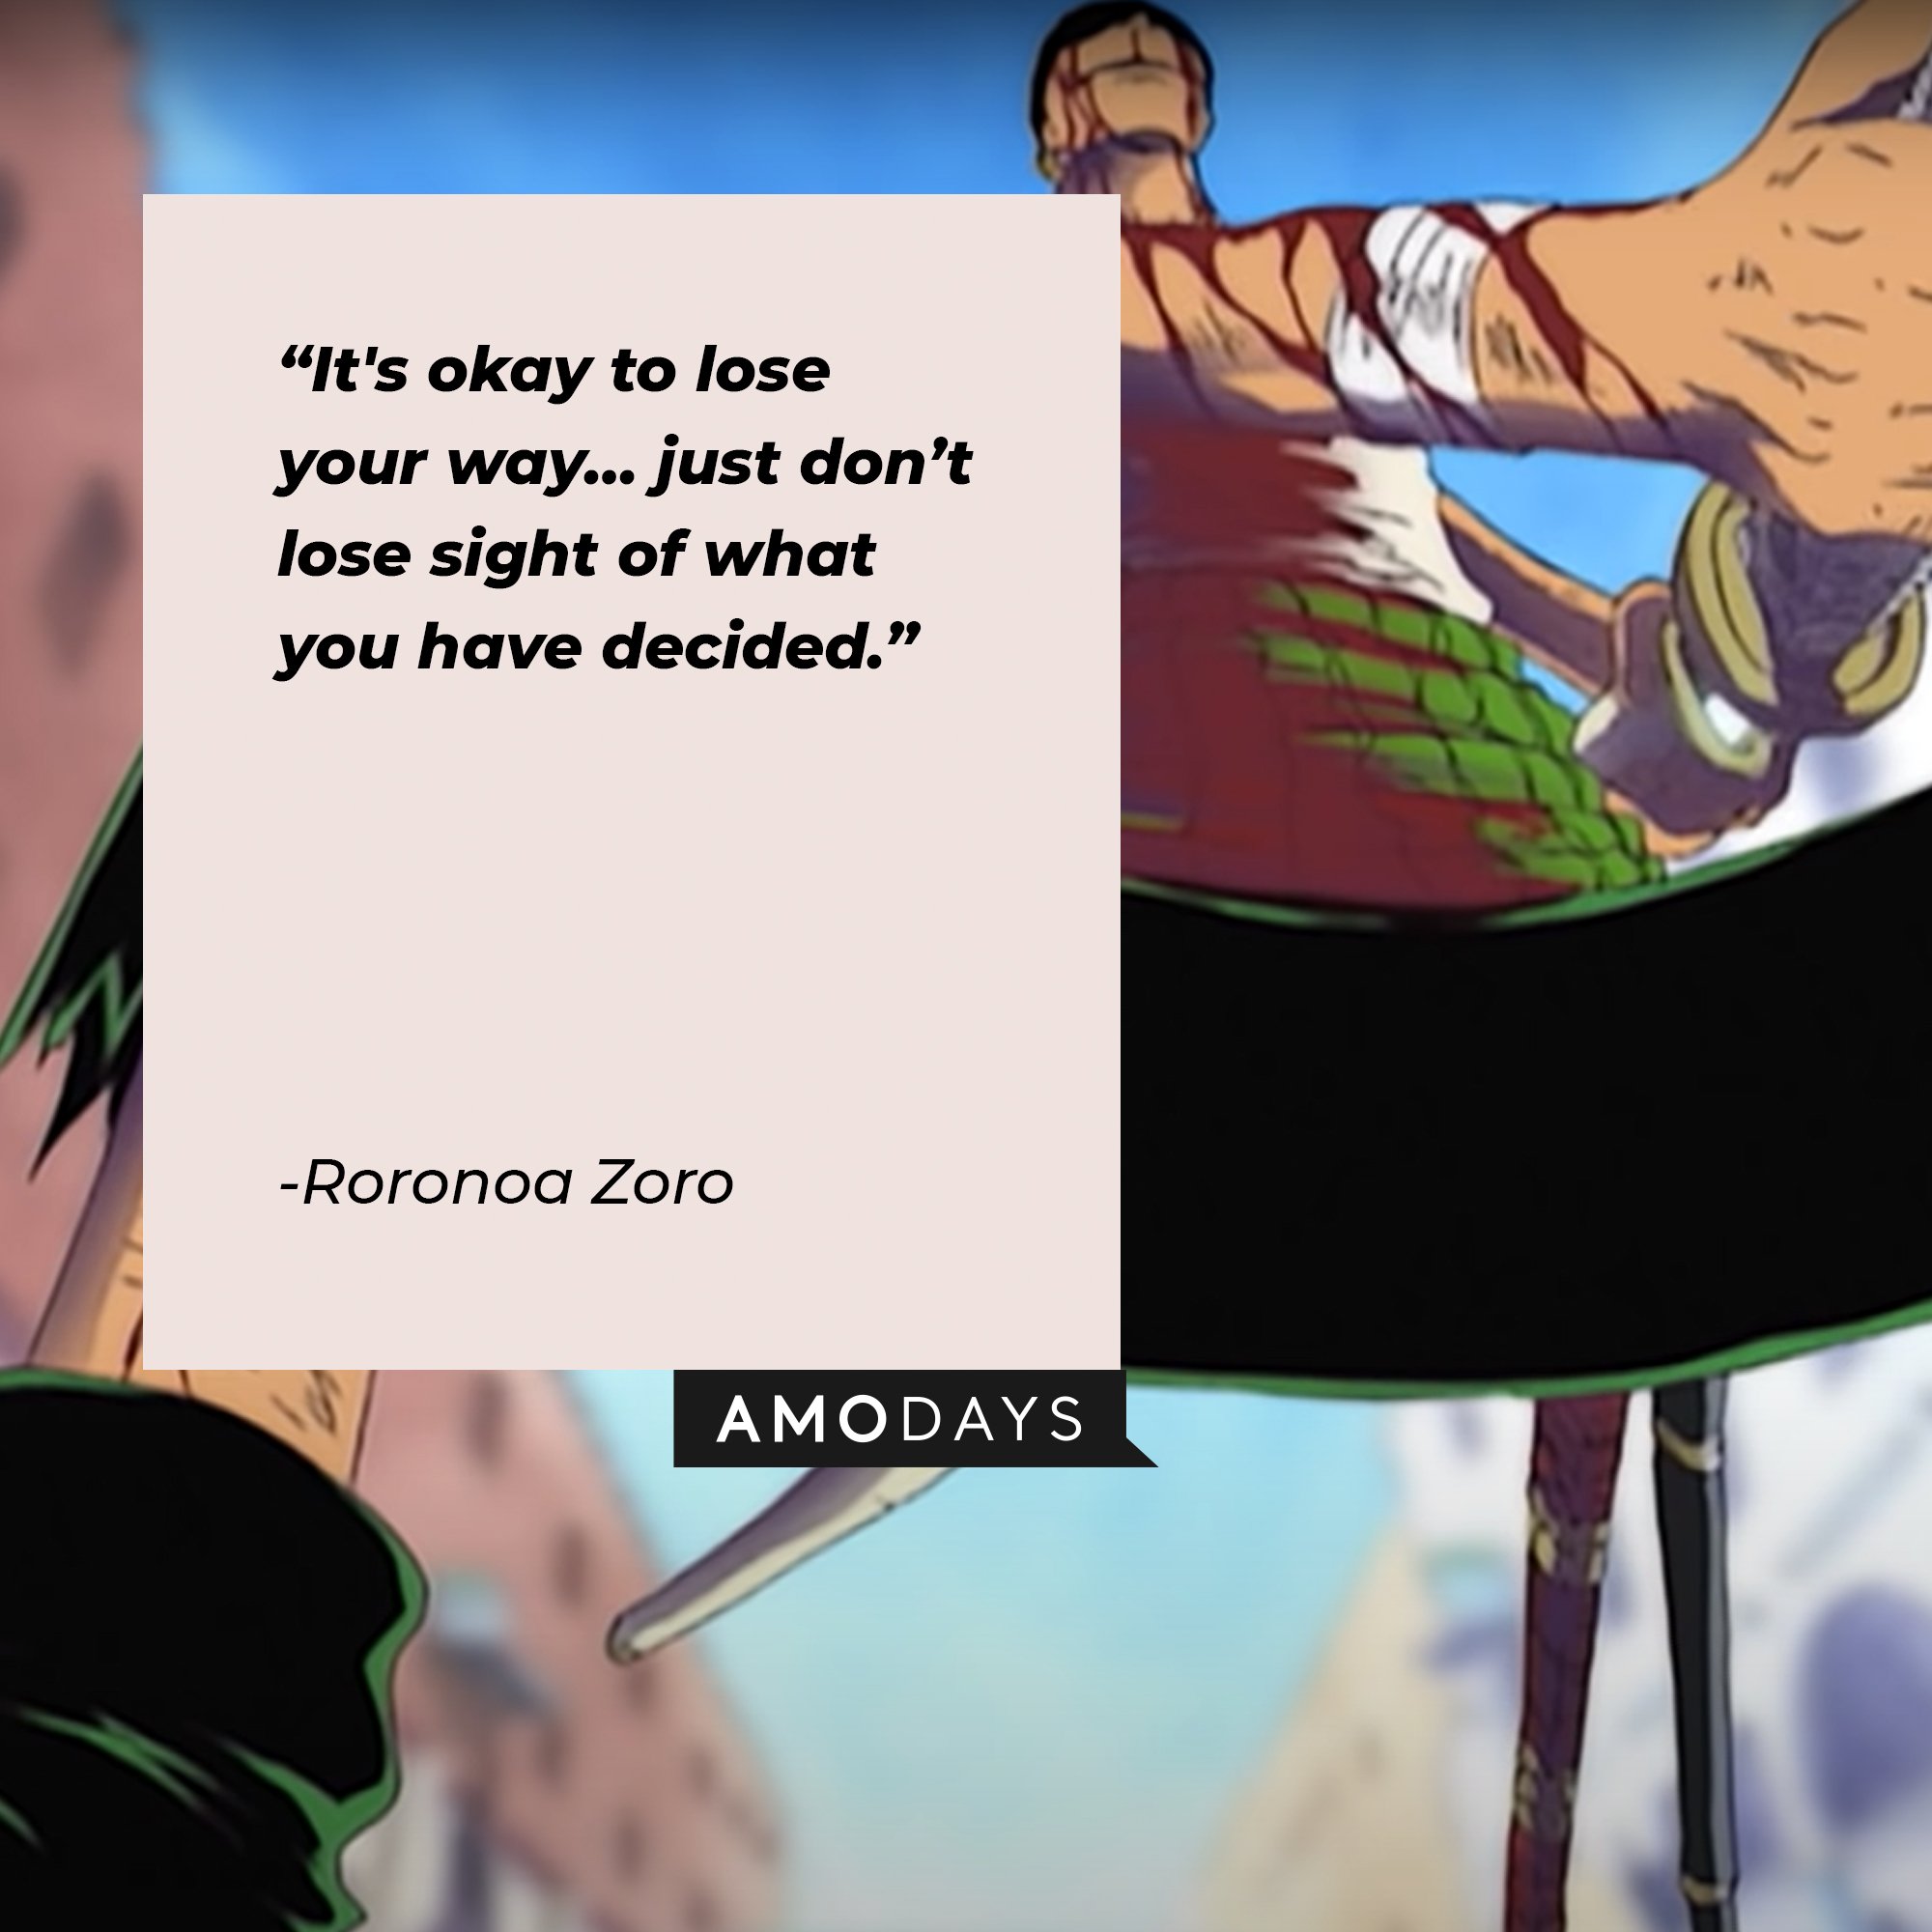 Roronoa Zoro’s quote: "It's okay to lose your way… just don't lose sight of what you have decided." | Image: AmoDays